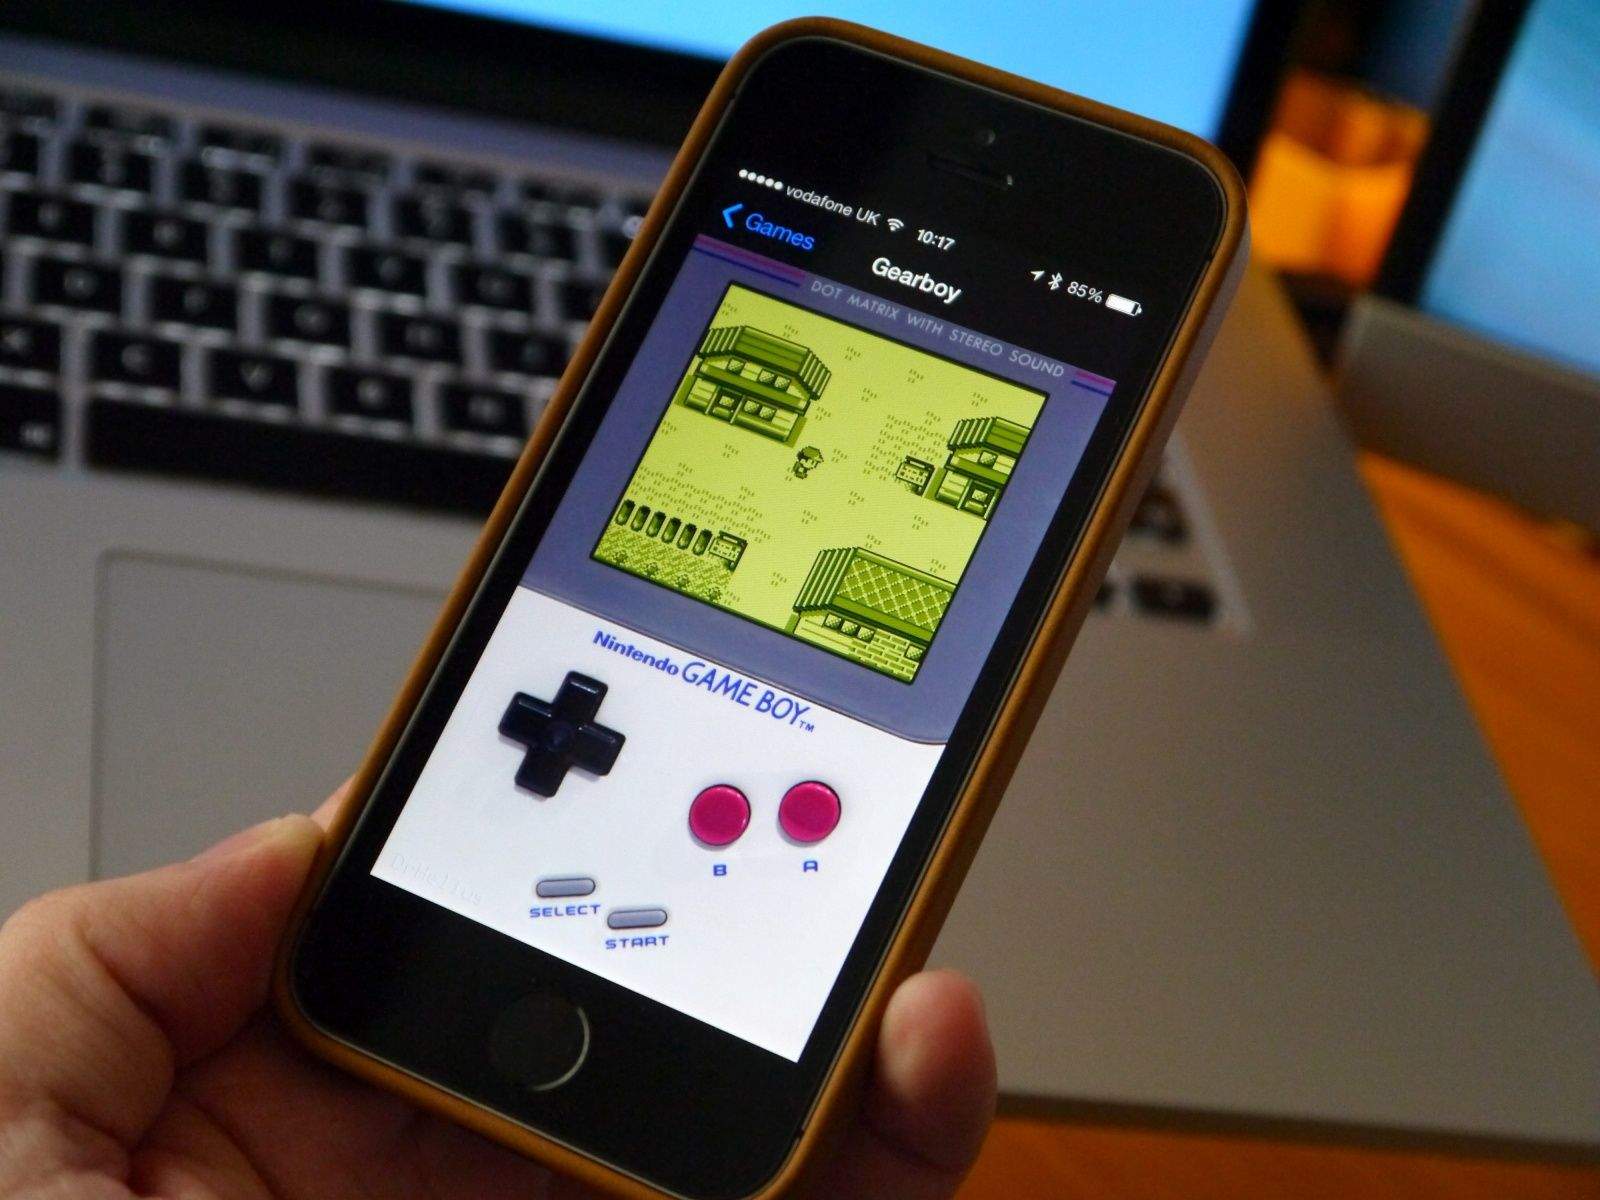 Another Game Boy Sneaks Into The App Store | Cult of Mac